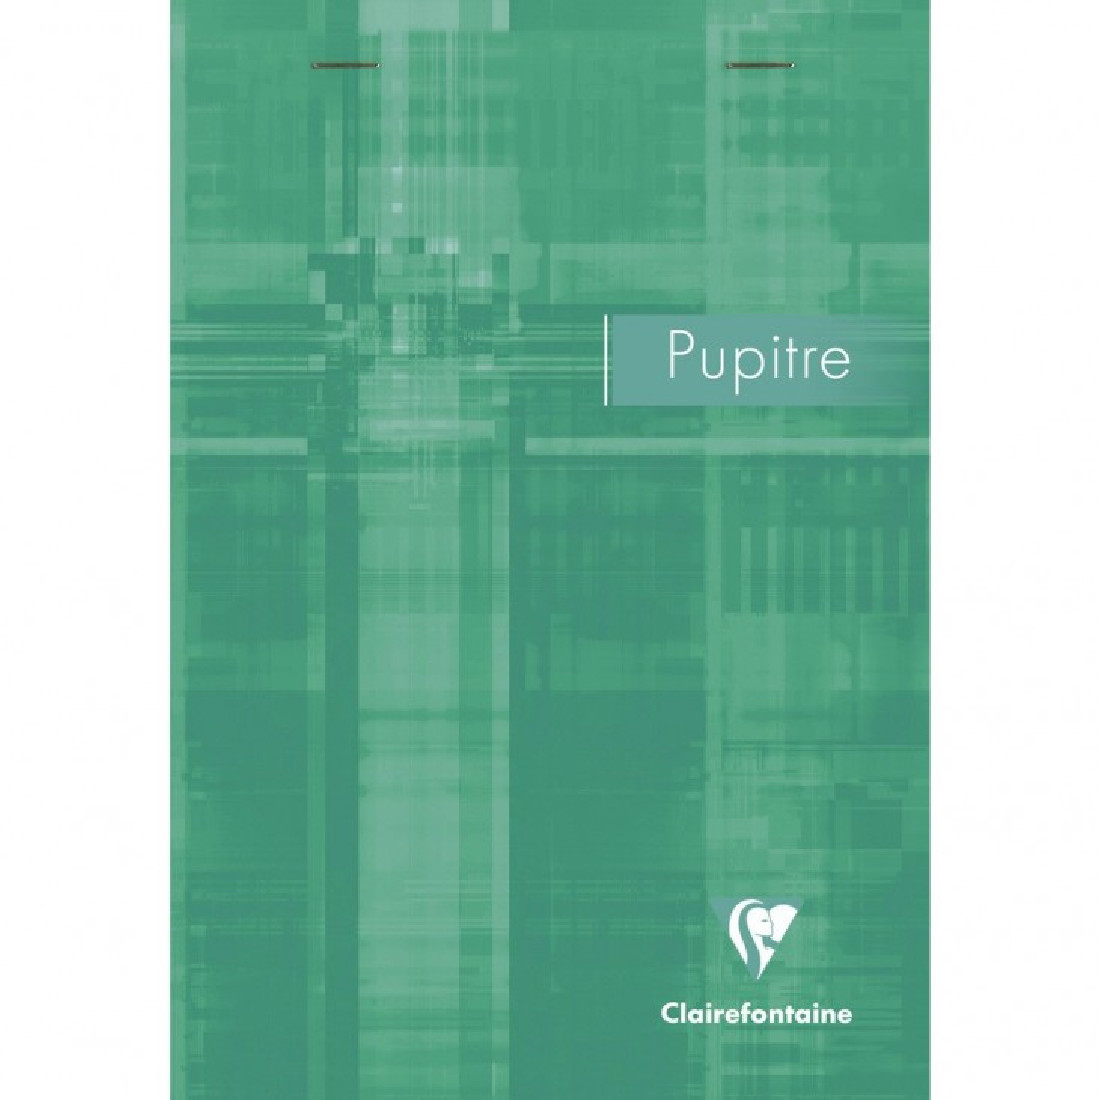 Clairefontaine Rhodia notepad A5 Pupitre, 14,8x21 cm, white paper 90gr, squared, 6662c green